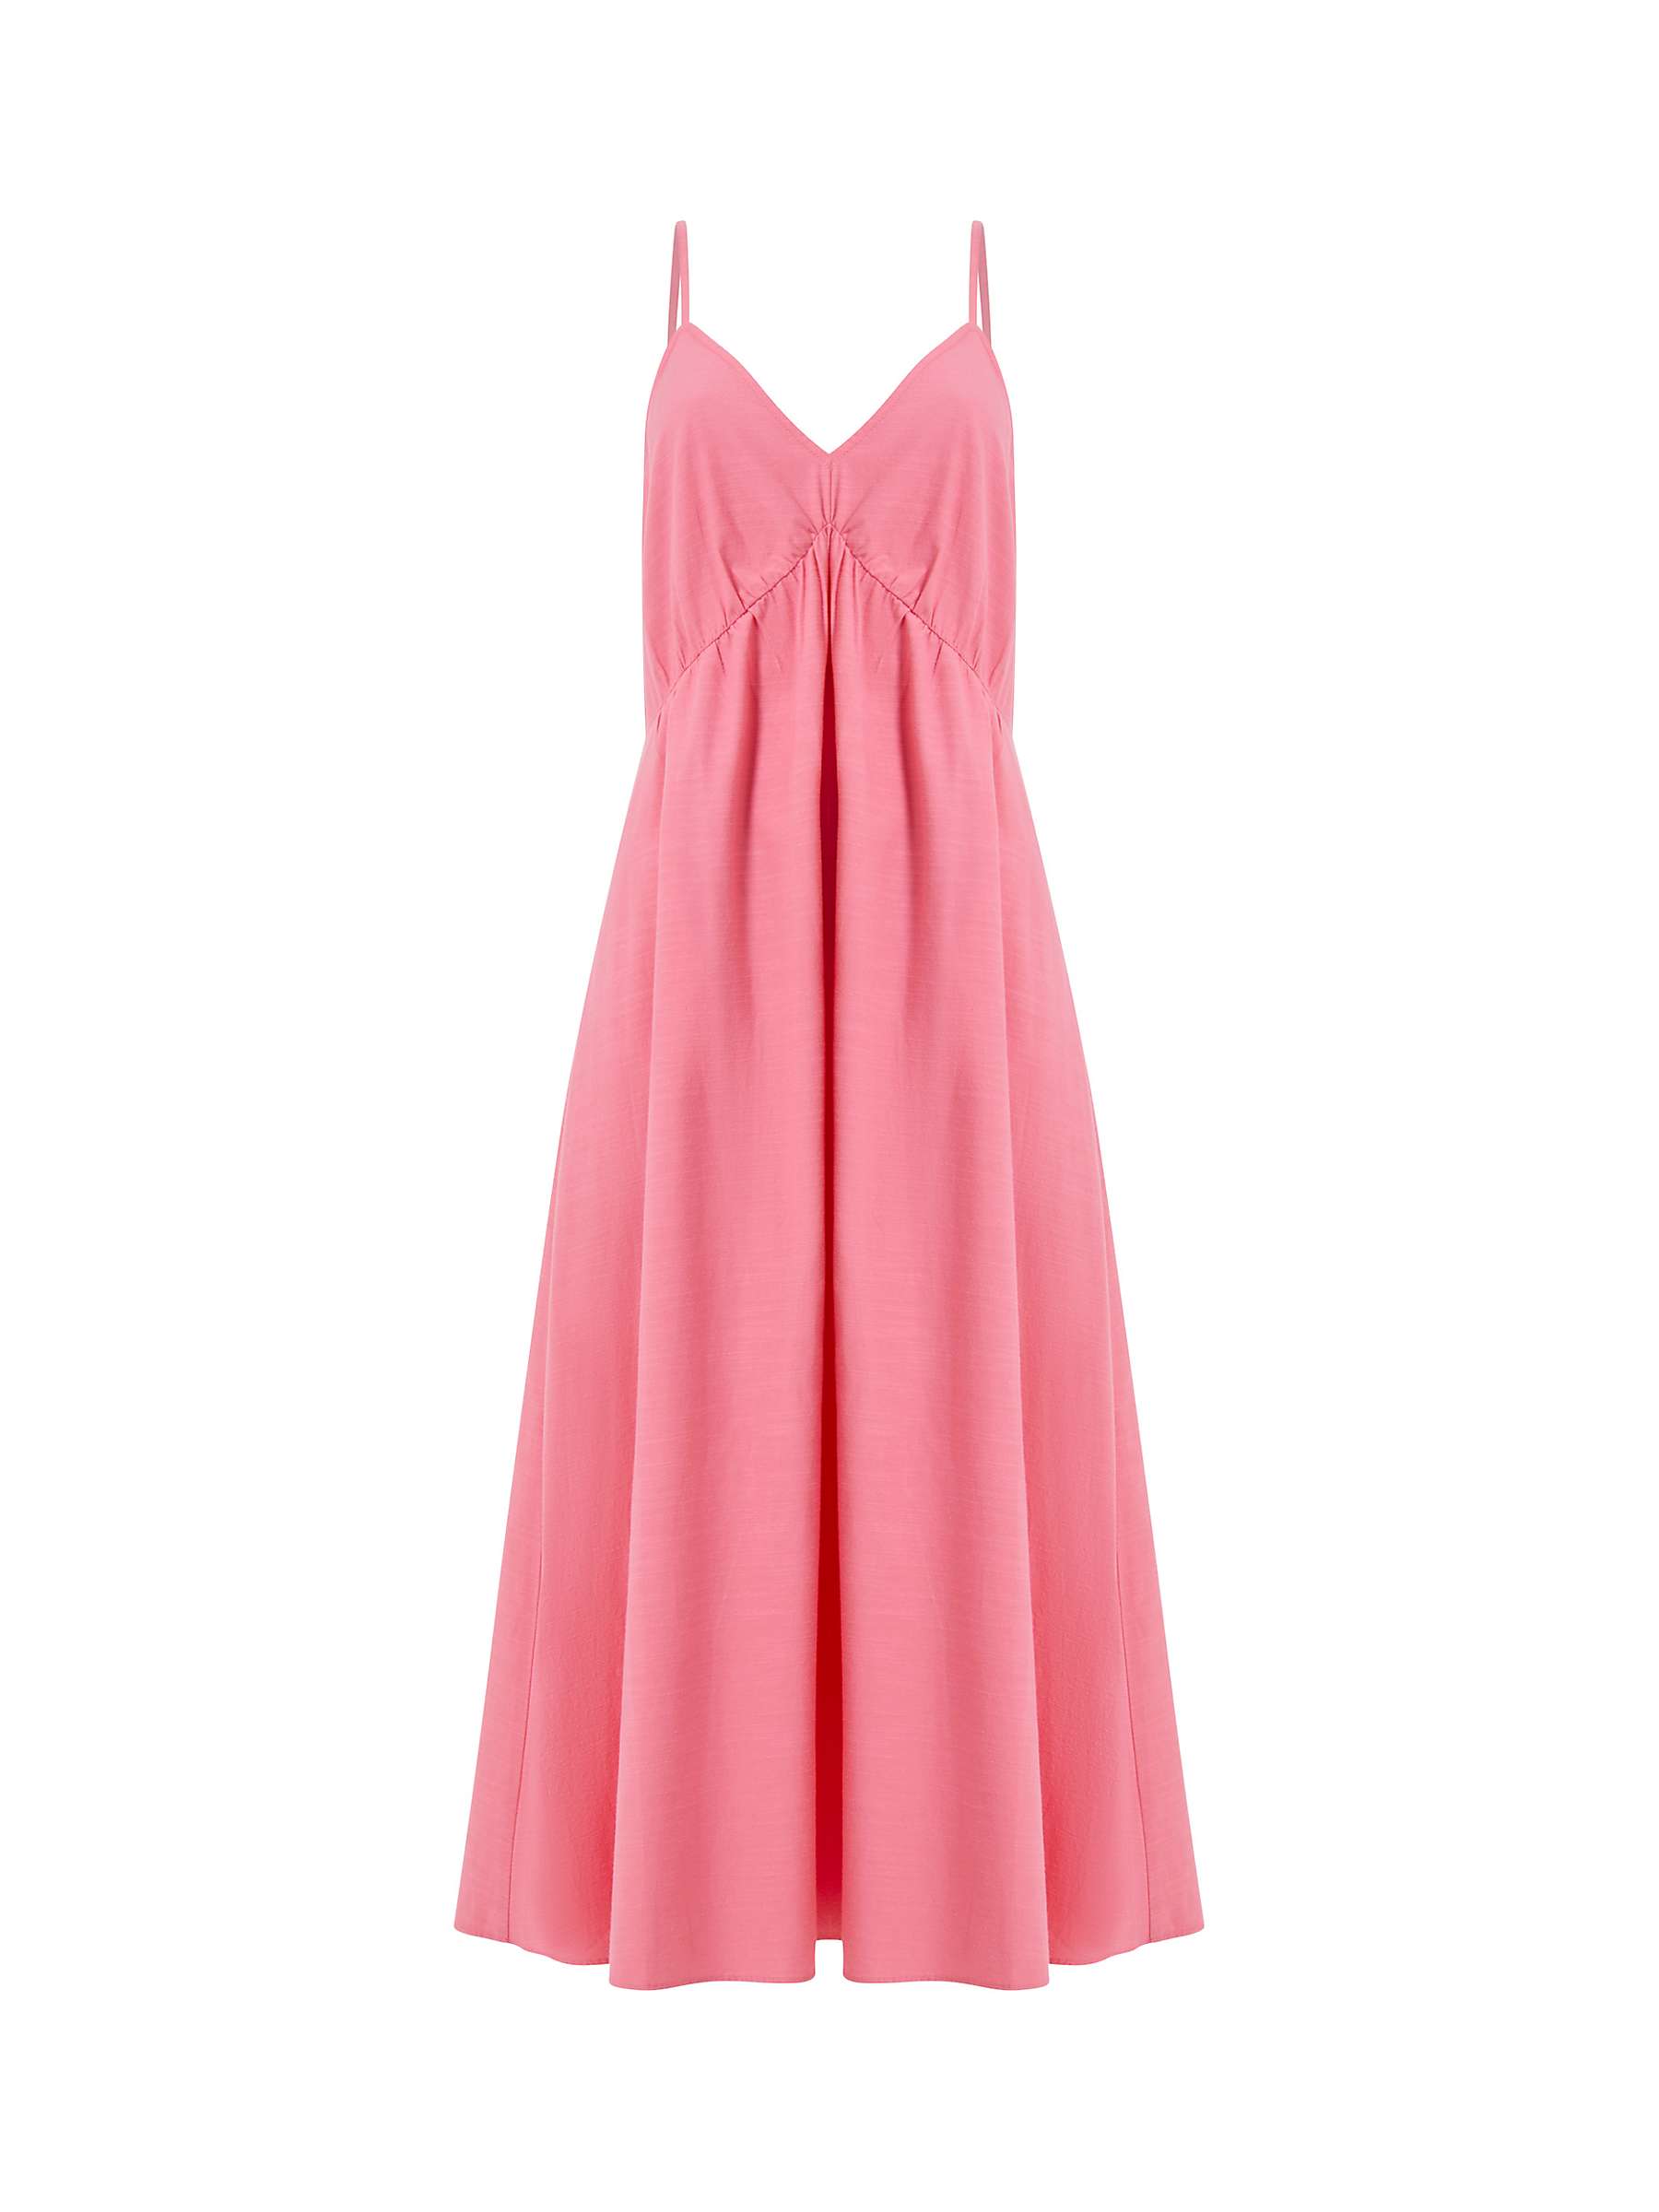 French Connection Alania Lyocell Blend Sun Dress, Rose at John Lewis ...